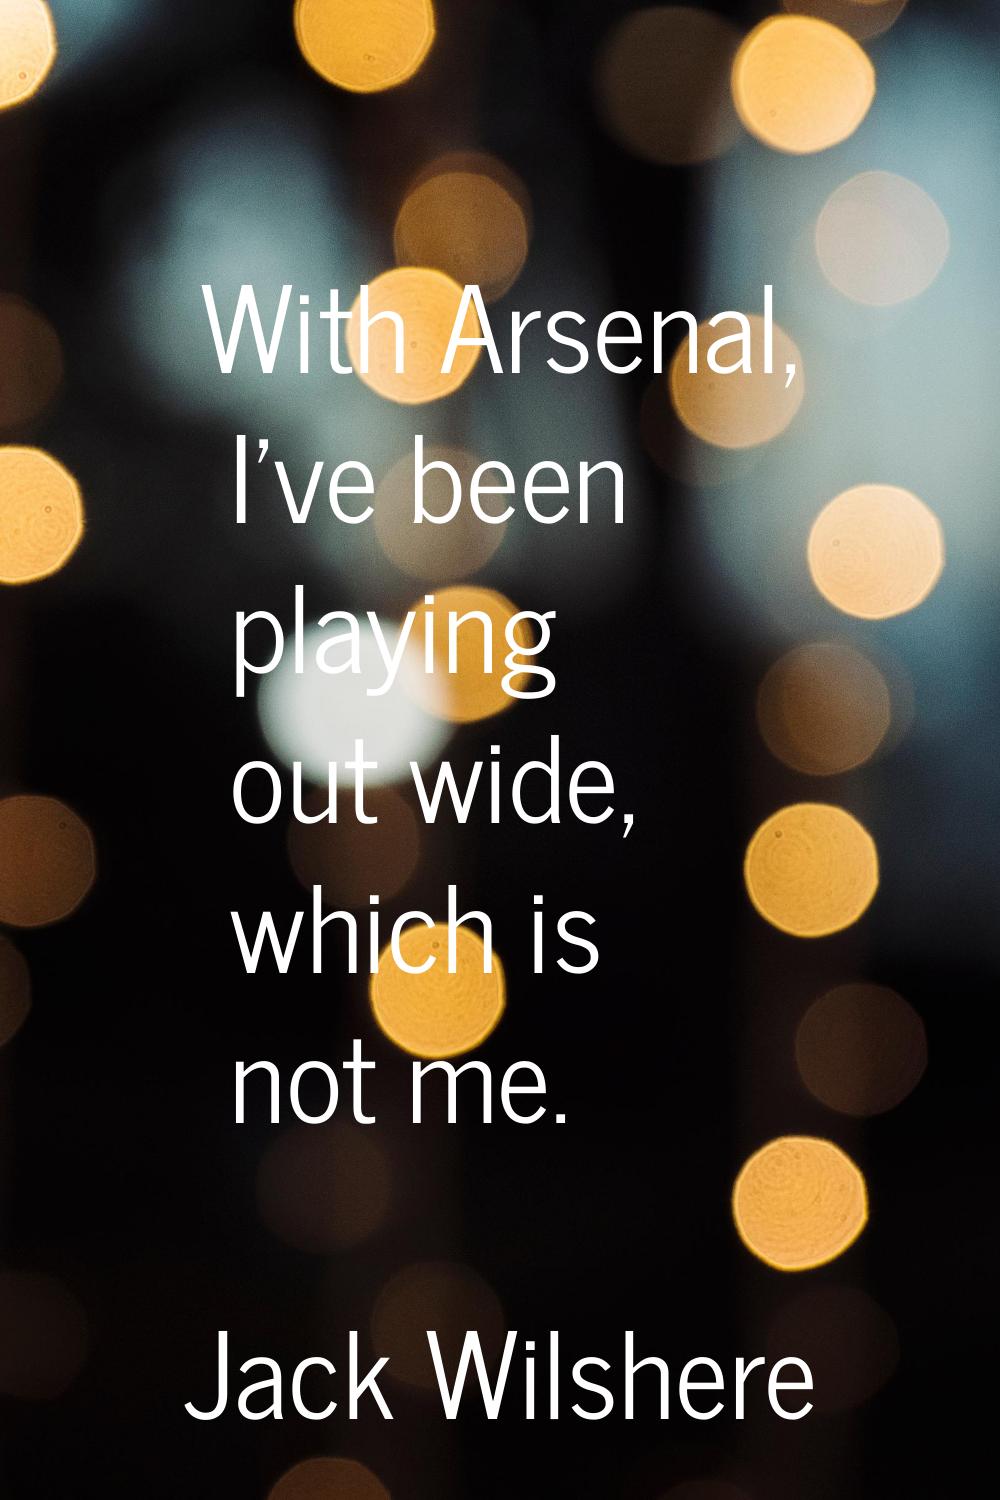 With Arsenal, I've been playing out wide, which is not me.